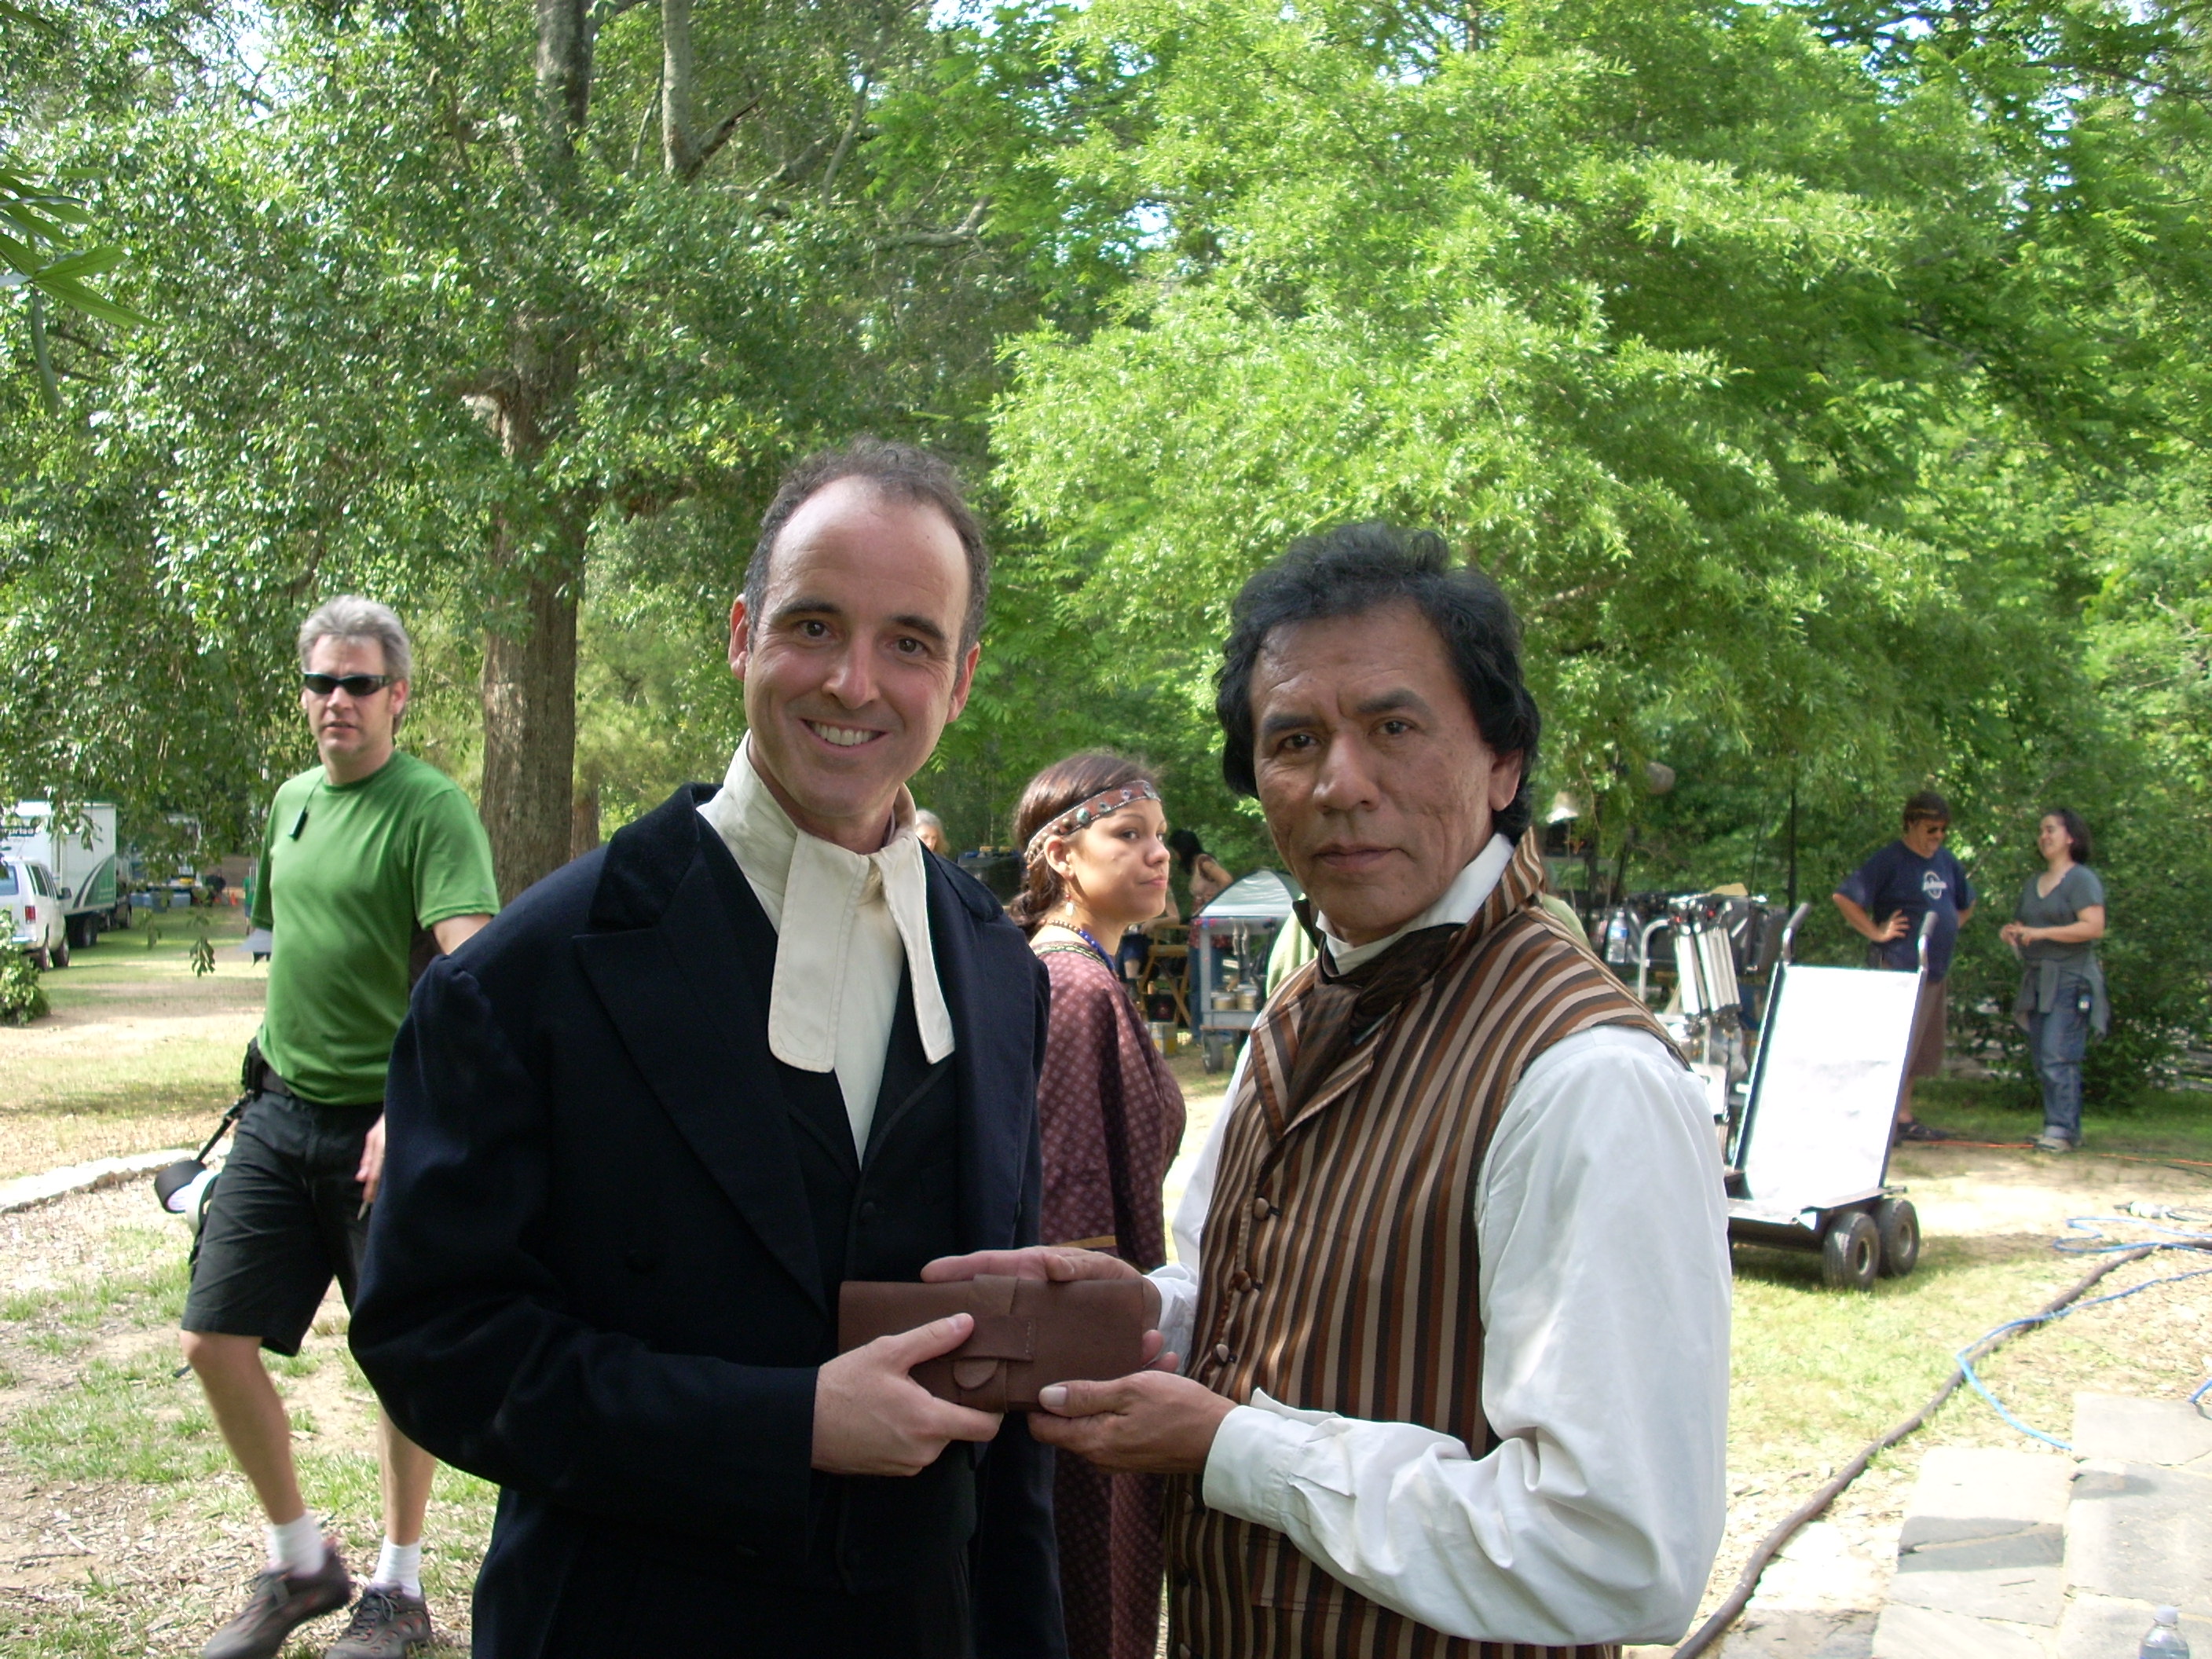 Robert Hatch with Wes Studi on PBS 